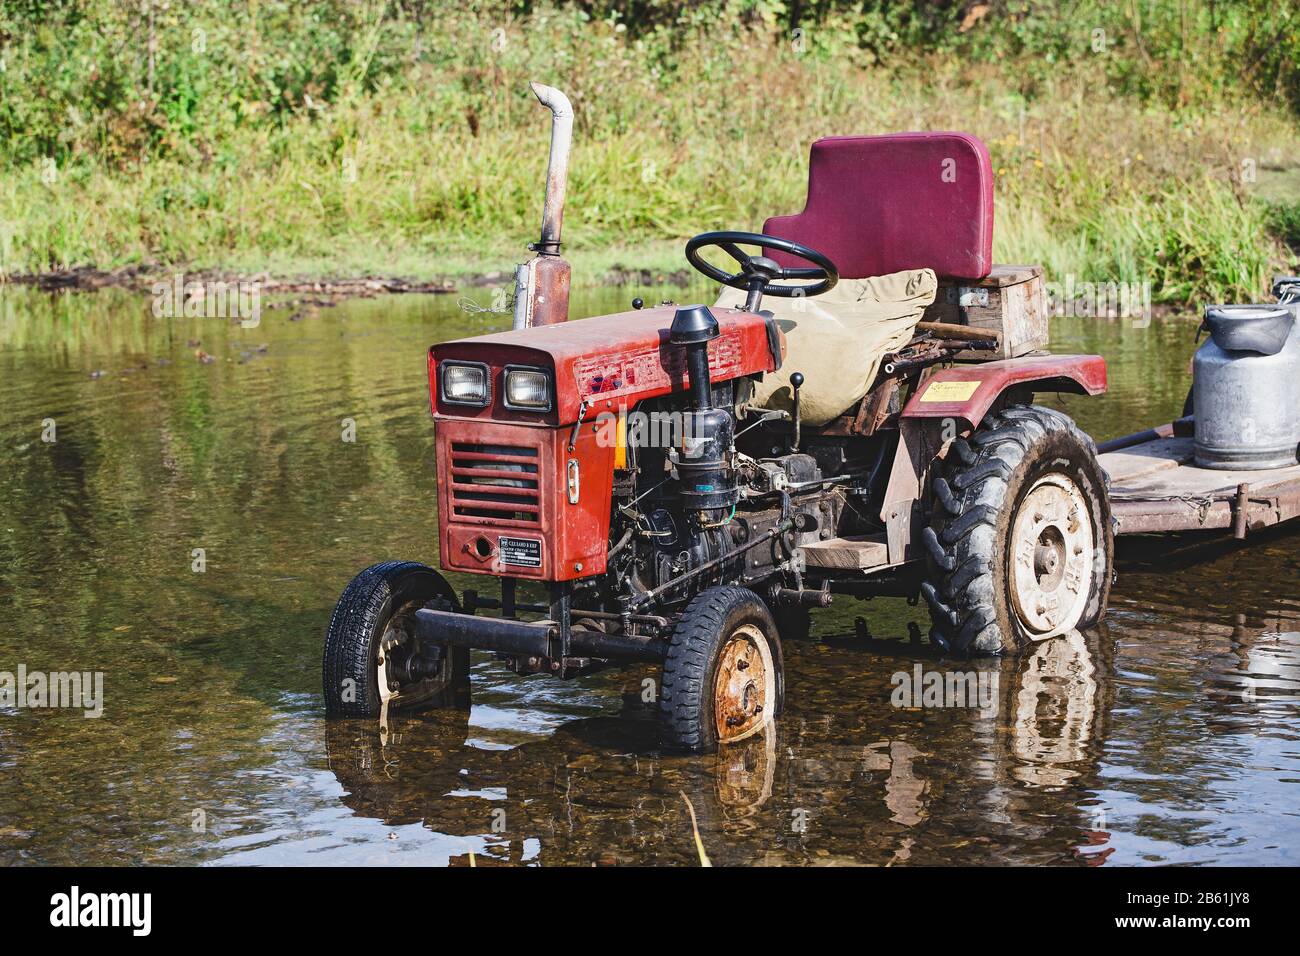 01 SEPTEMBER 2017, NIKOLAEVKA VILLAGE, BASHKORTOSTAN, RUSSIA: Old red tractor in water near the shore of the river Stock Photo